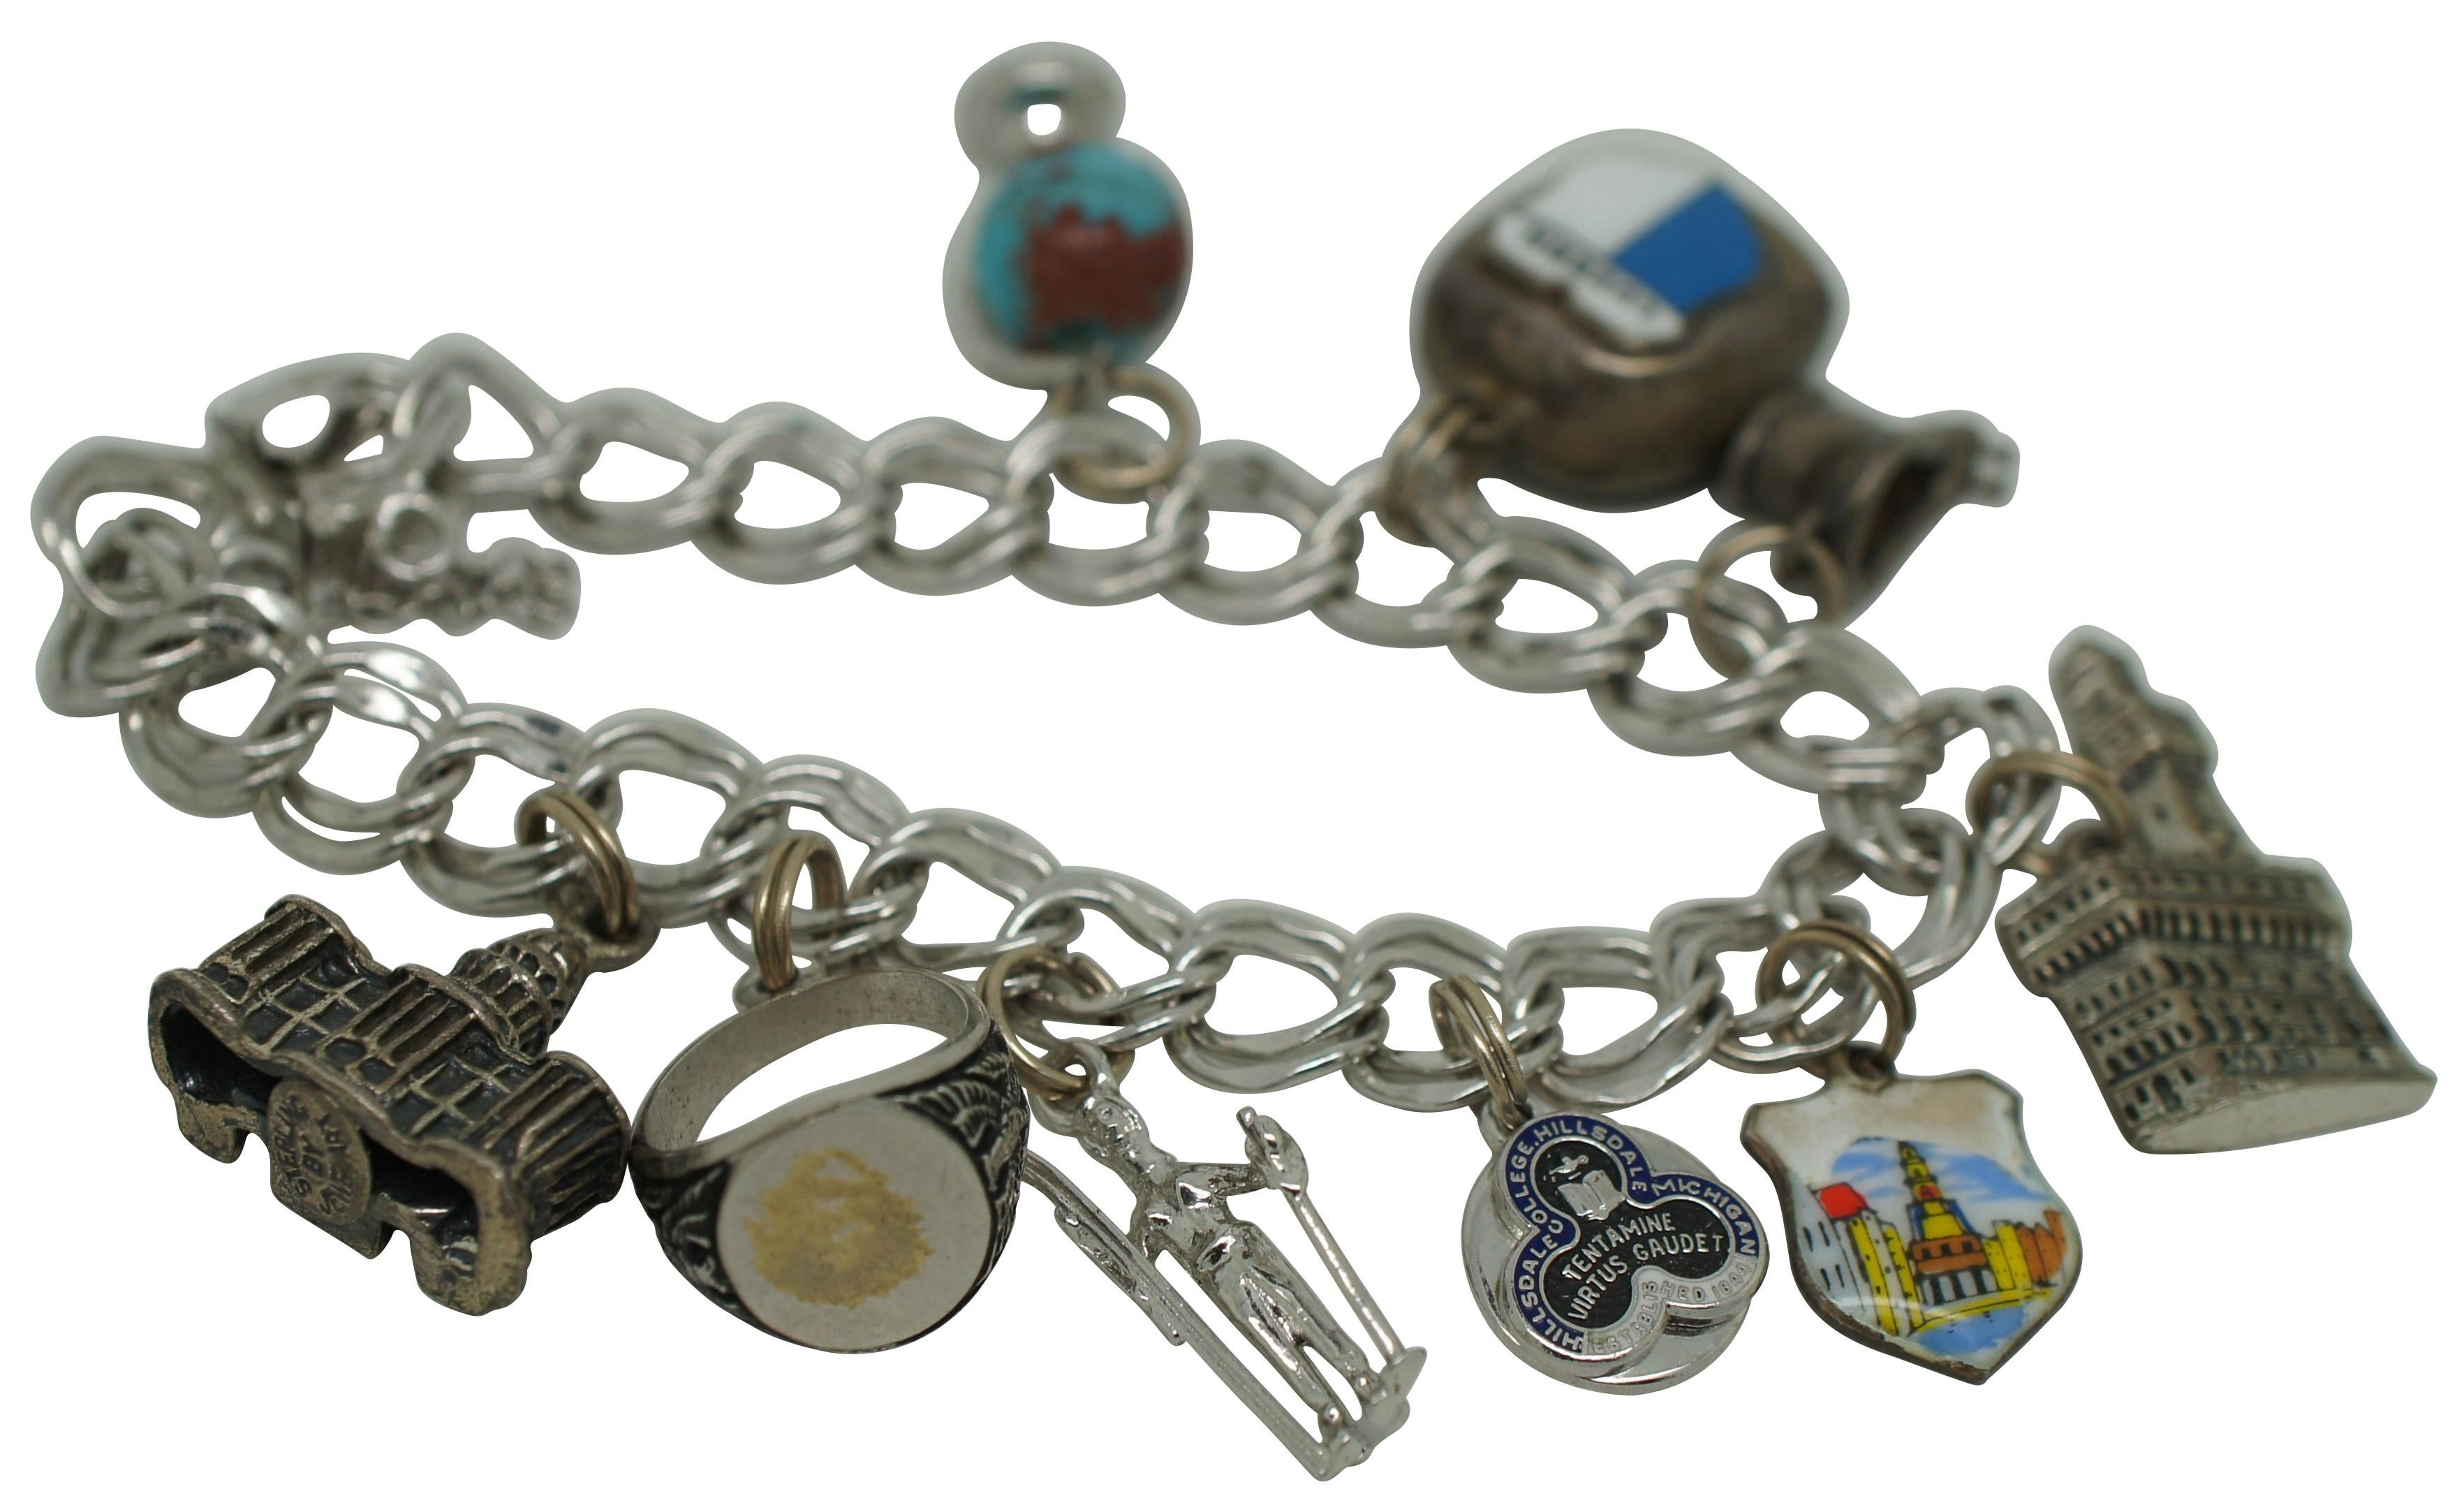 Vintage charm bracelet featuring an Elco sterling double link chain and open box clasp. Charms include a plastic globe with sterling stand, 800 silver bell with enamel Luzern shield, unmarked bidet, 800 silver Pallazzo Vecchio tower marked Firenze